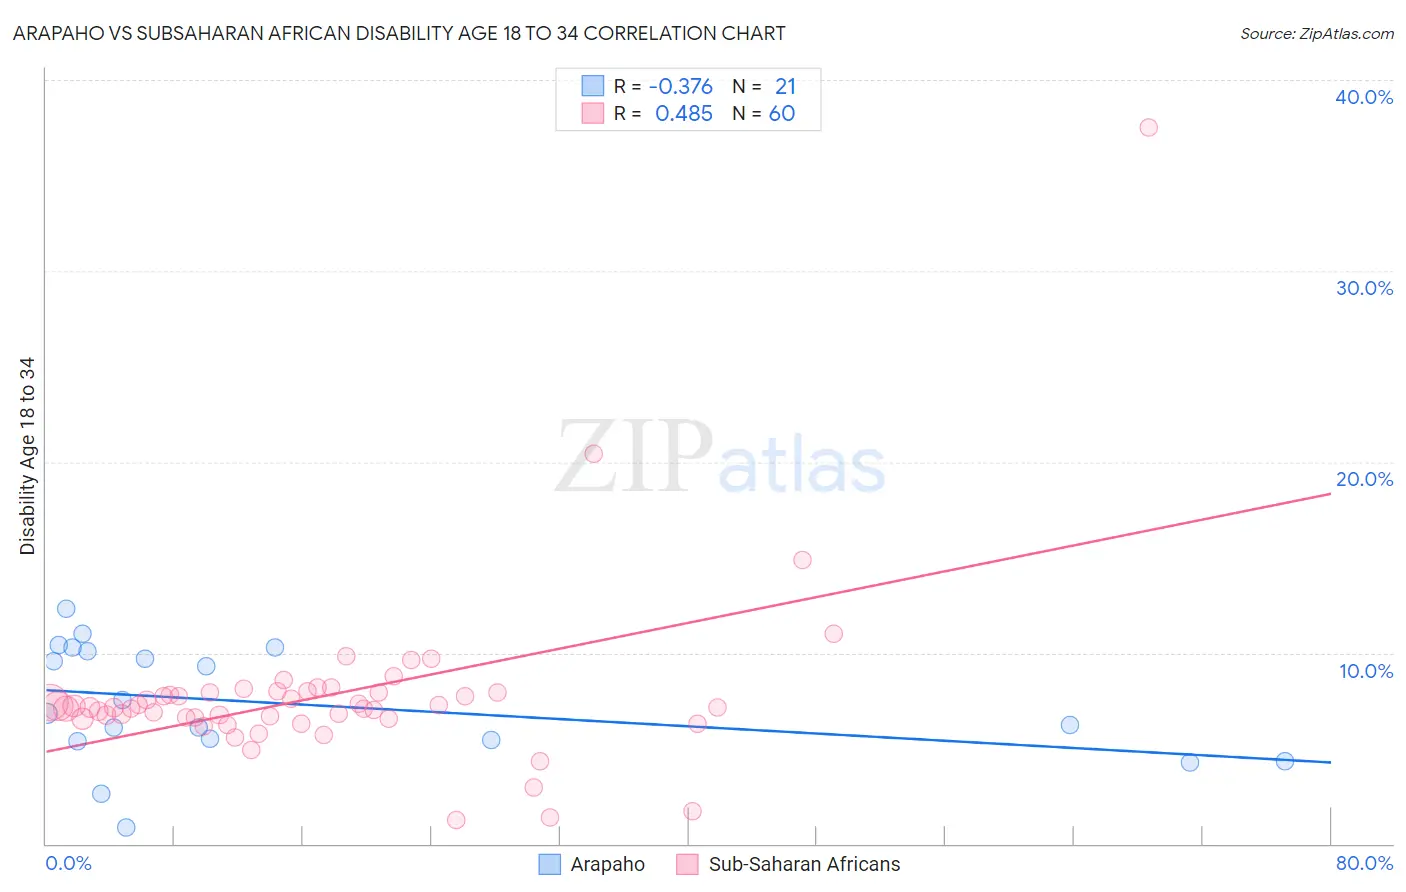 Arapaho vs Subsaharan African Disability Age 18 to 34